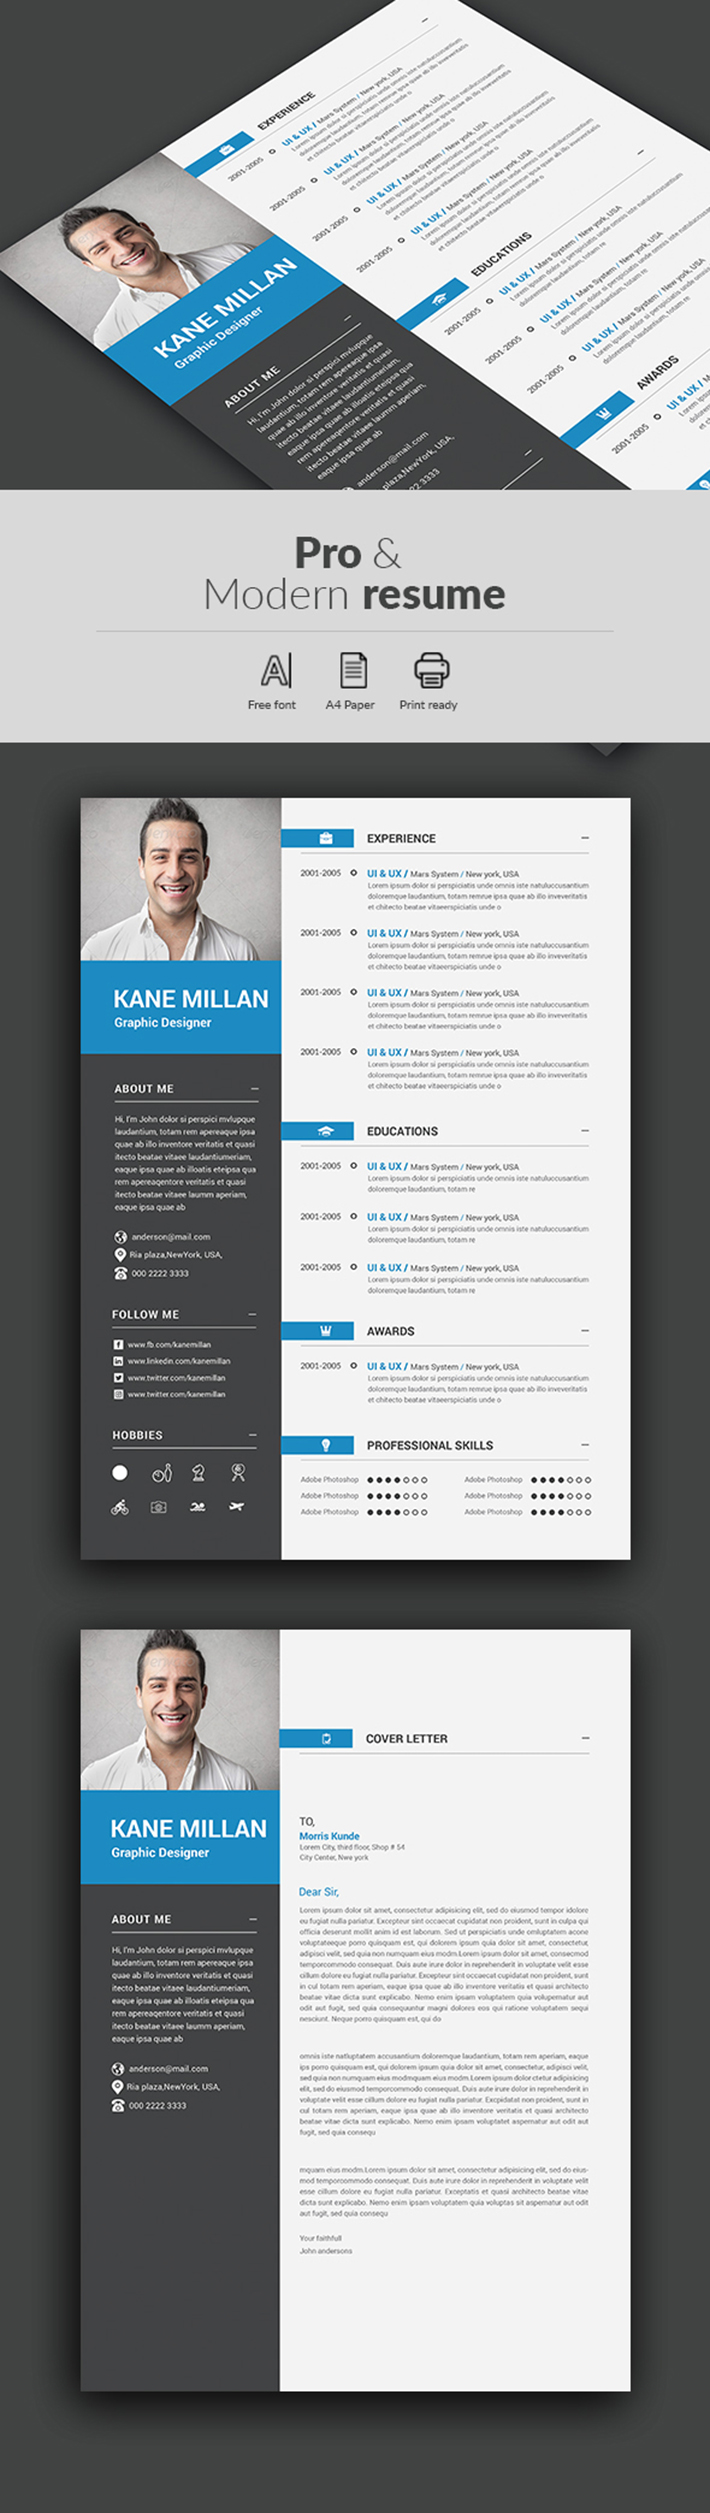 Professional Resume (CV) Template in Word and PS